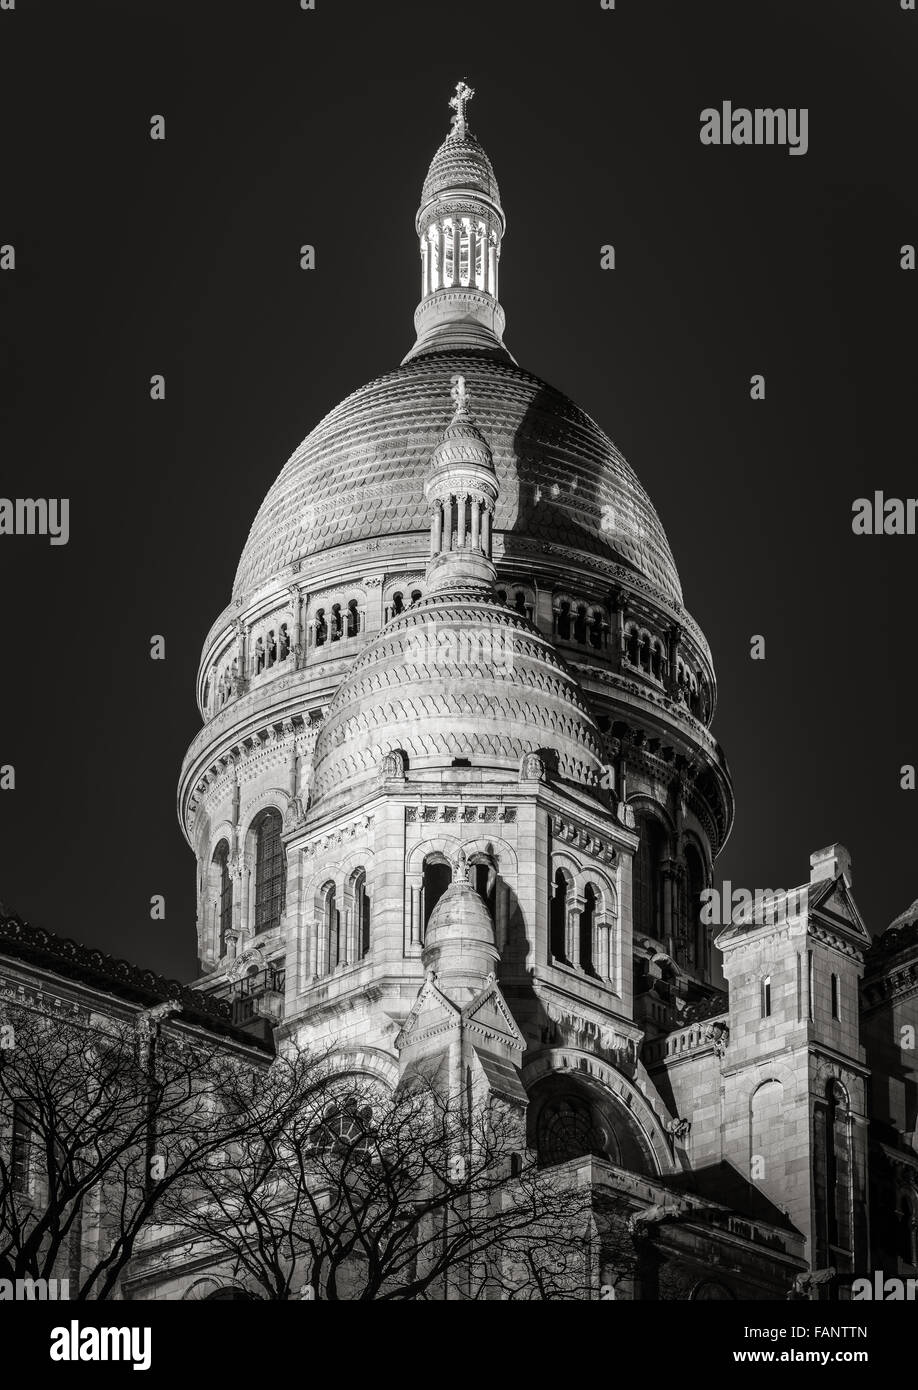 Black & White view of the domes of Sacre Coeur Basilica (Sacred Heart)  illuminated at night in Montmartre, Paris, France. Stock Photo